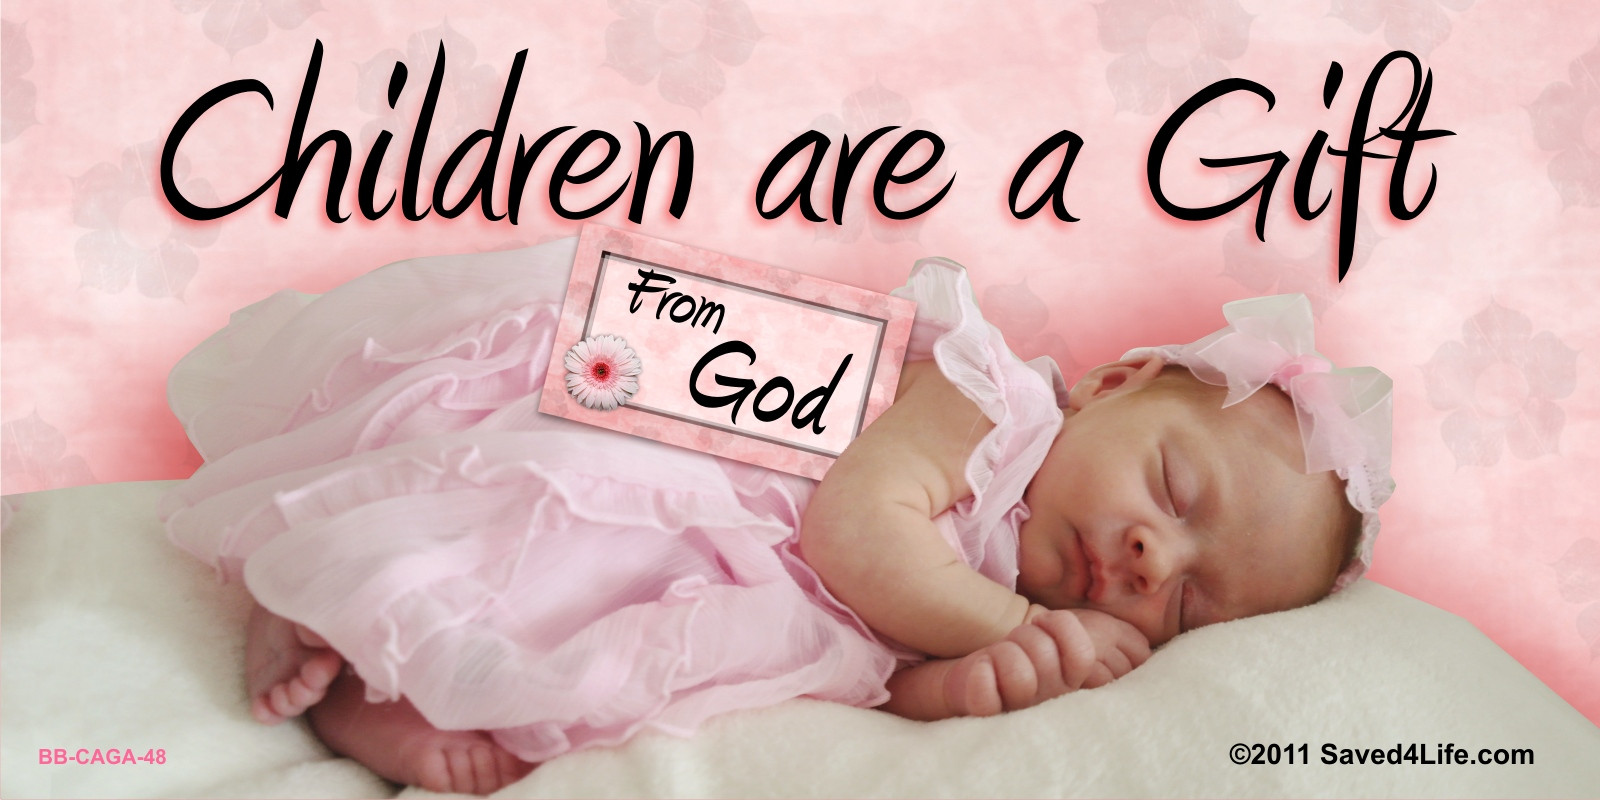 Children Gifts From God
 Children are a Gift from God Billboard Children are a Gift